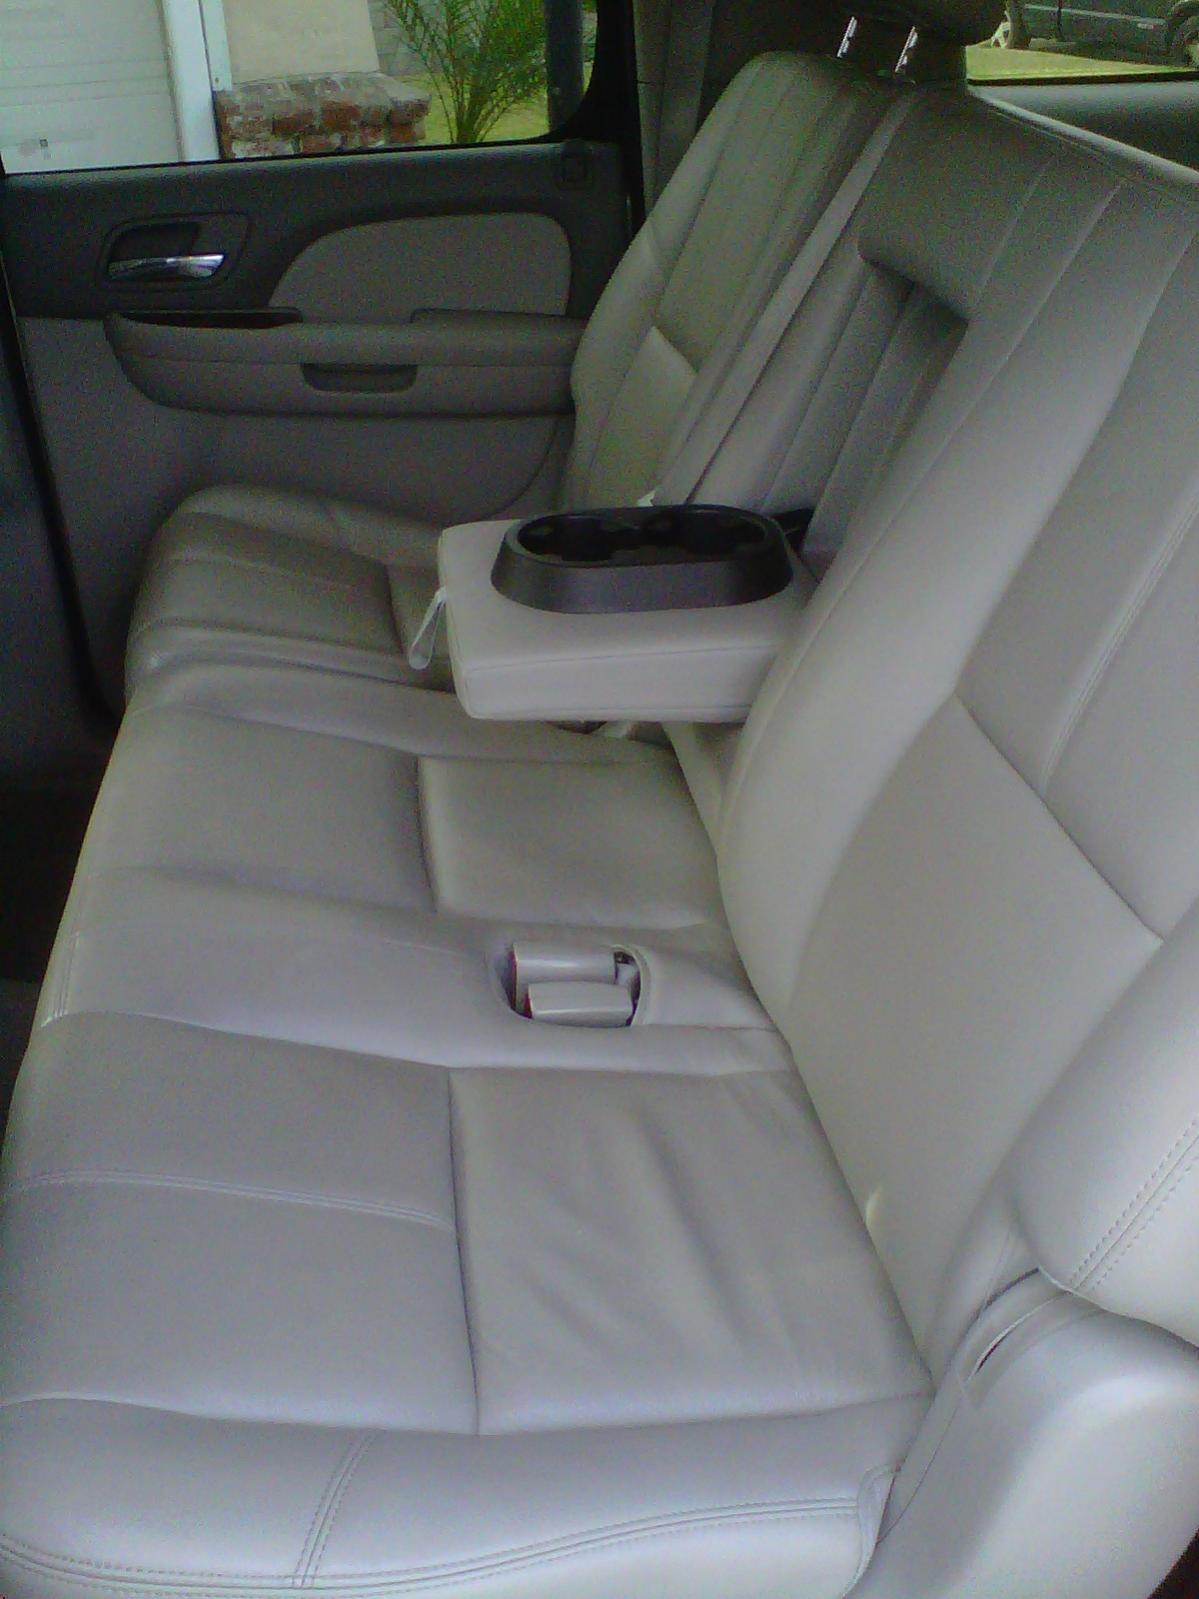 changing 2nd row seats to bucket seat - Chevrolet Forum - Chevy 2011 Suburban 2nd Row Seat Removal